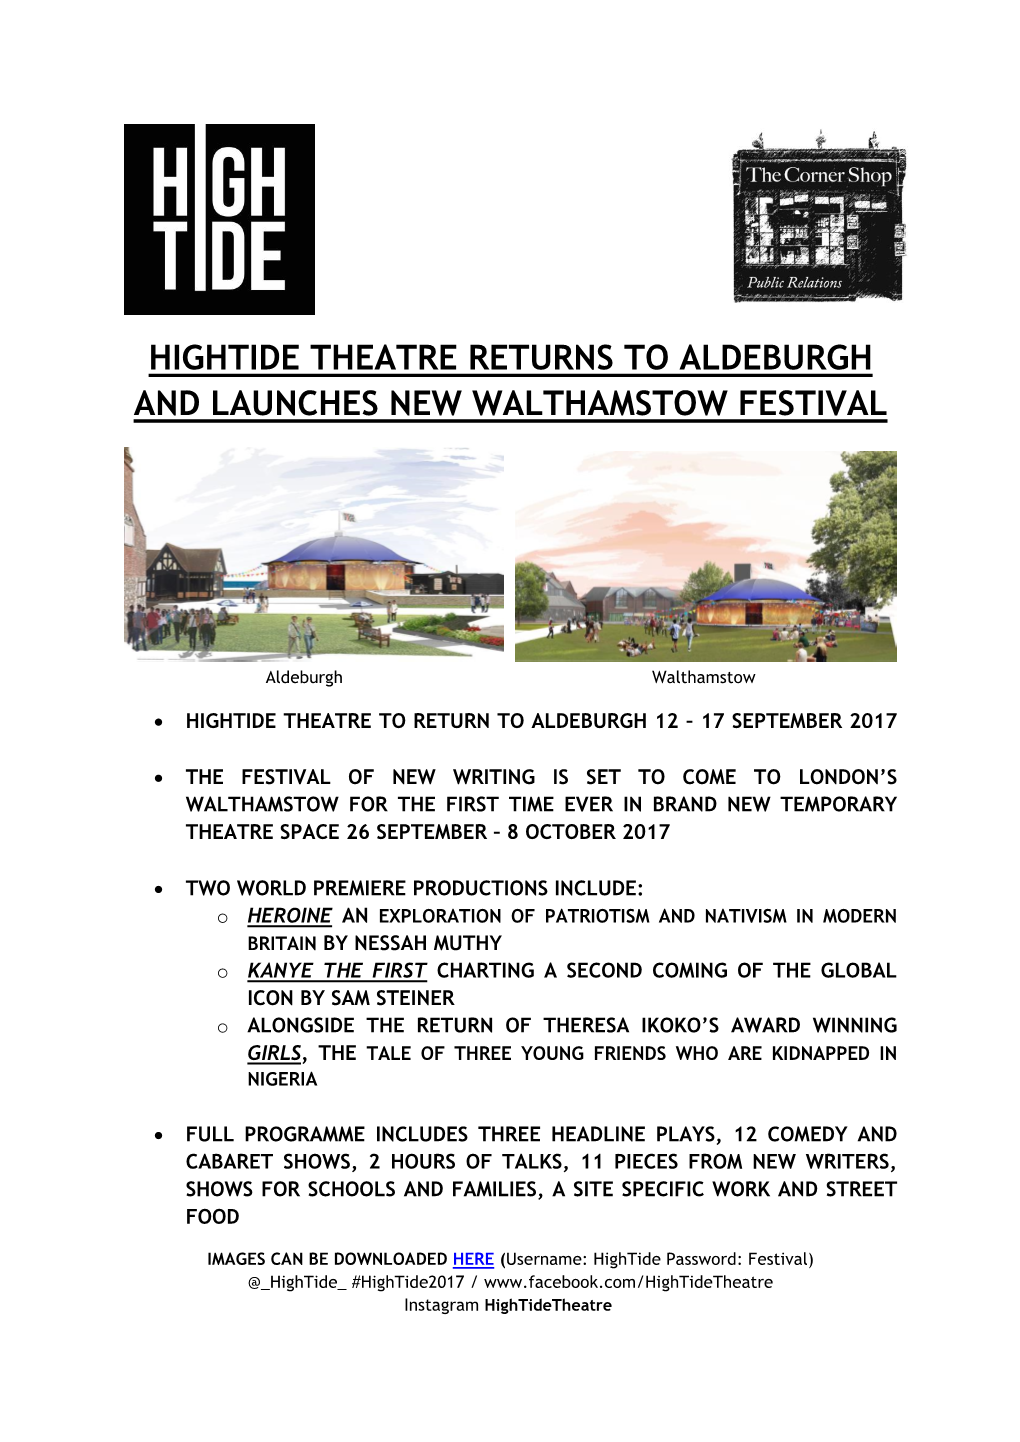 Hightide Theatre Returns to Aldeburgh and Launches New Walthamstow Festival